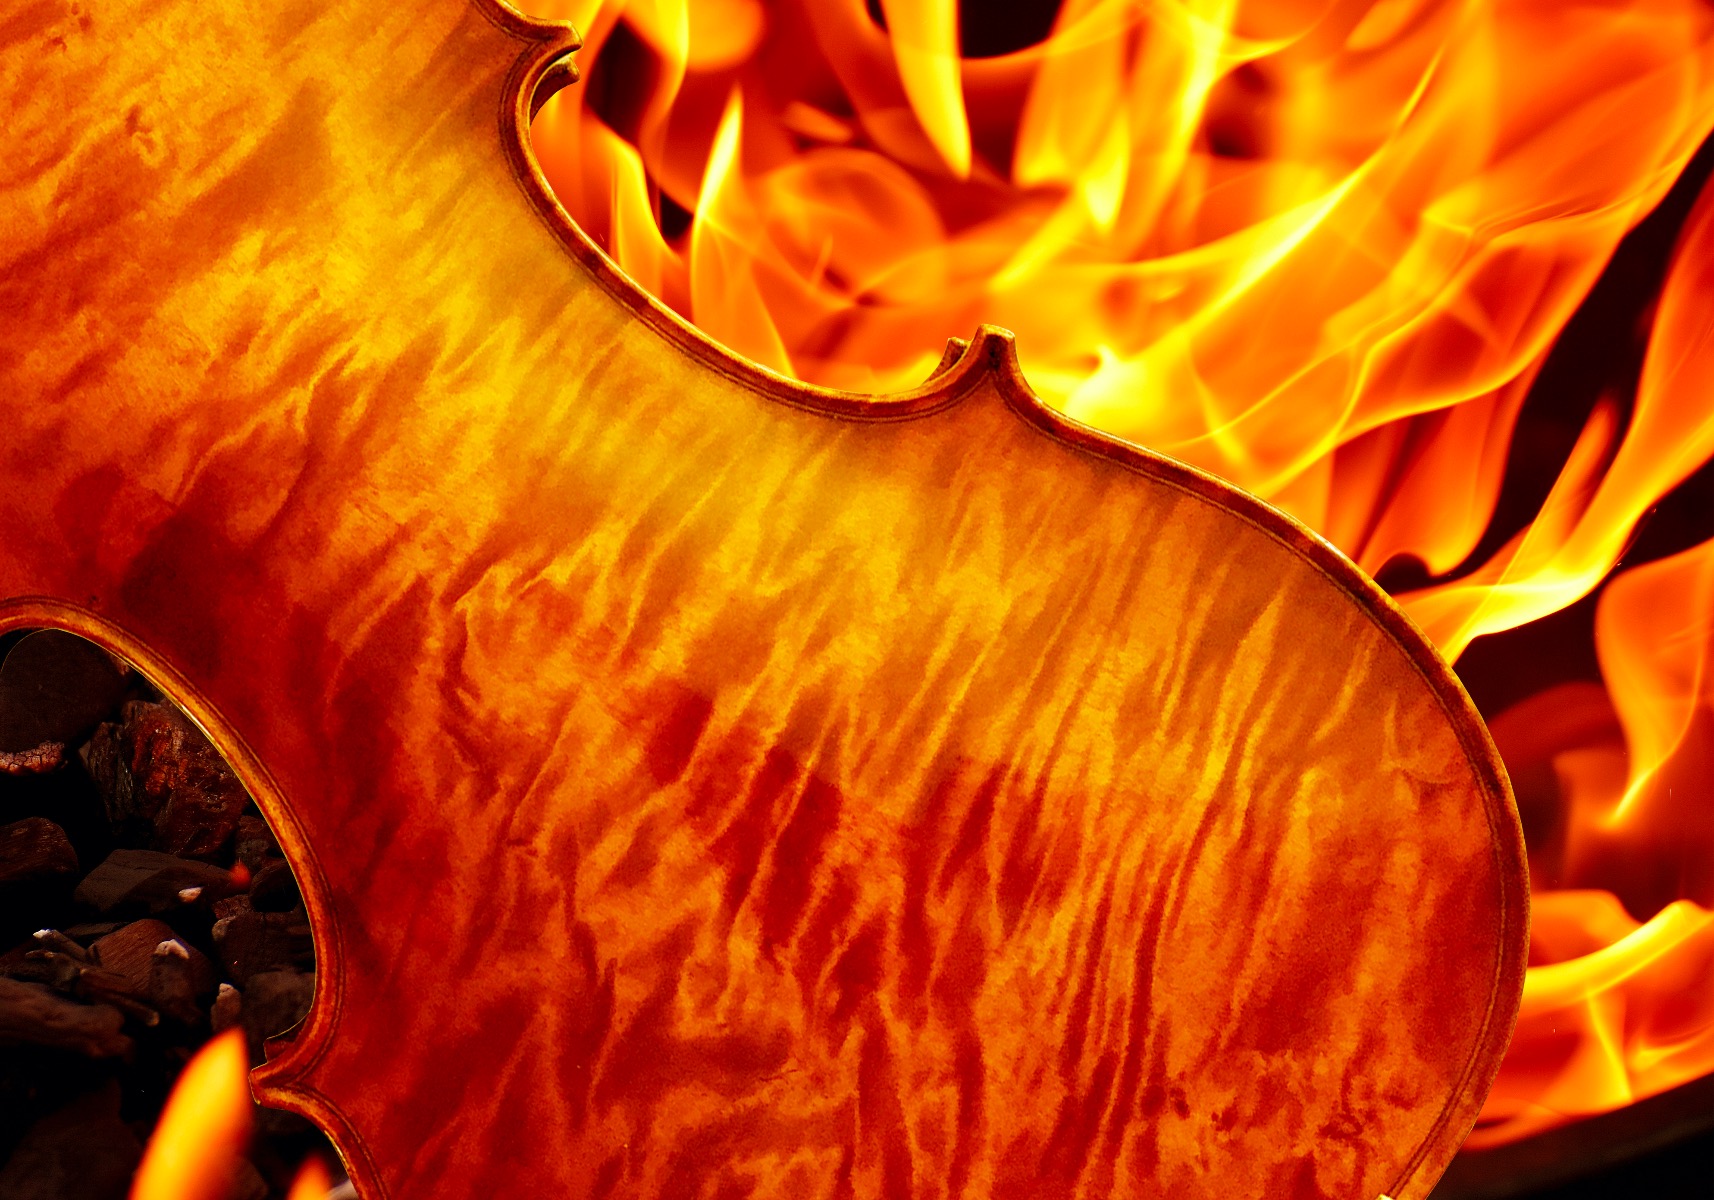 Violin with marbled flame over a similar looking campfire